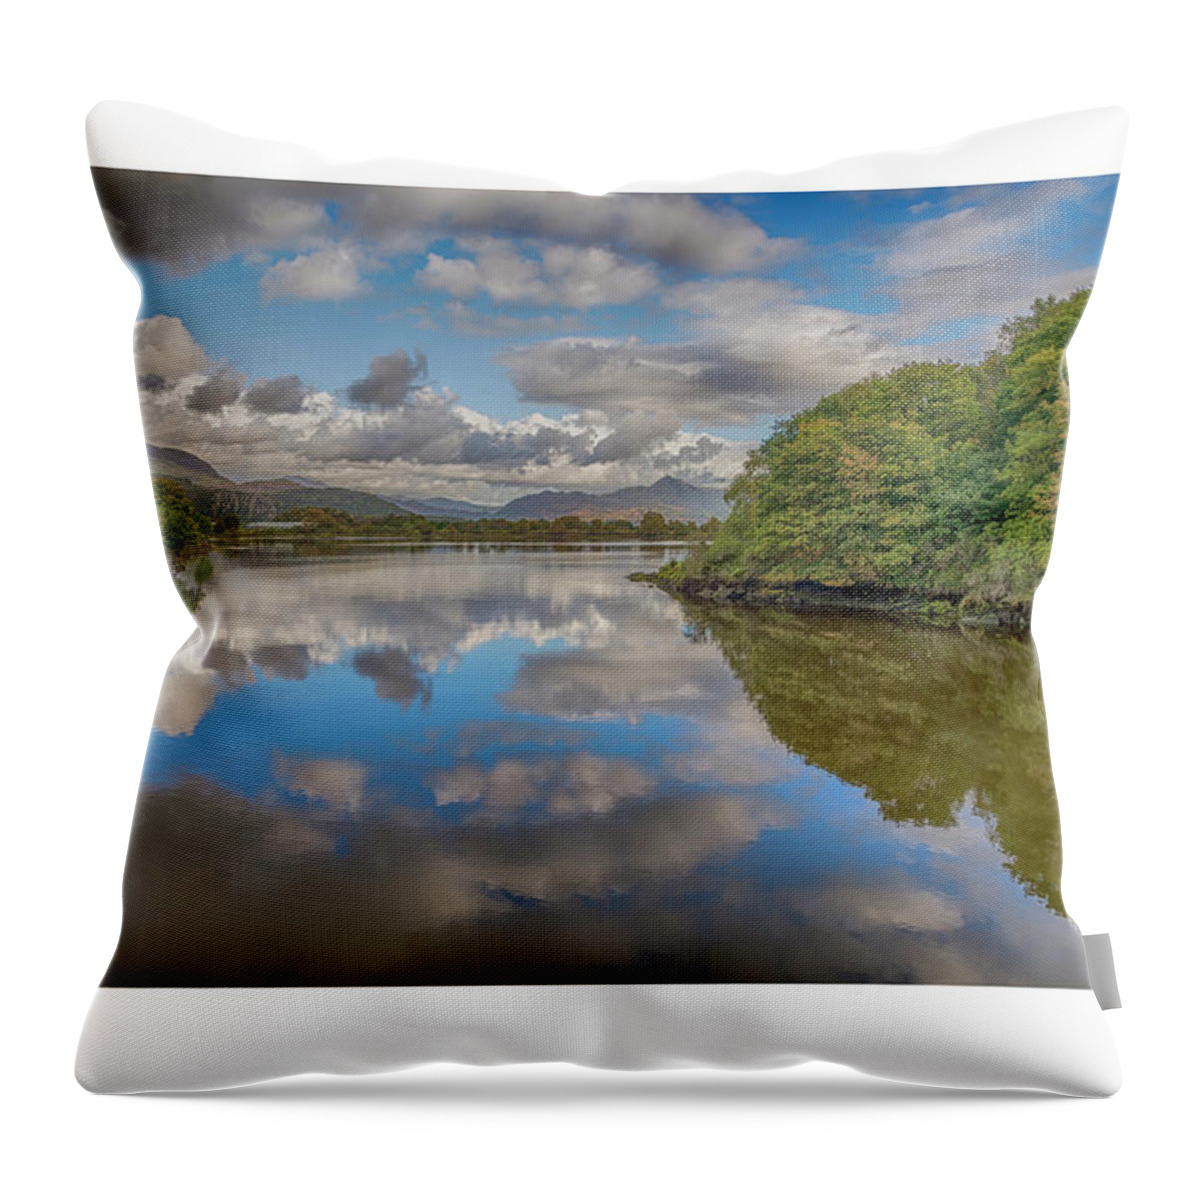 Wales Throw Pillow featuring the photograph Snowdonia by R Thomas Berner